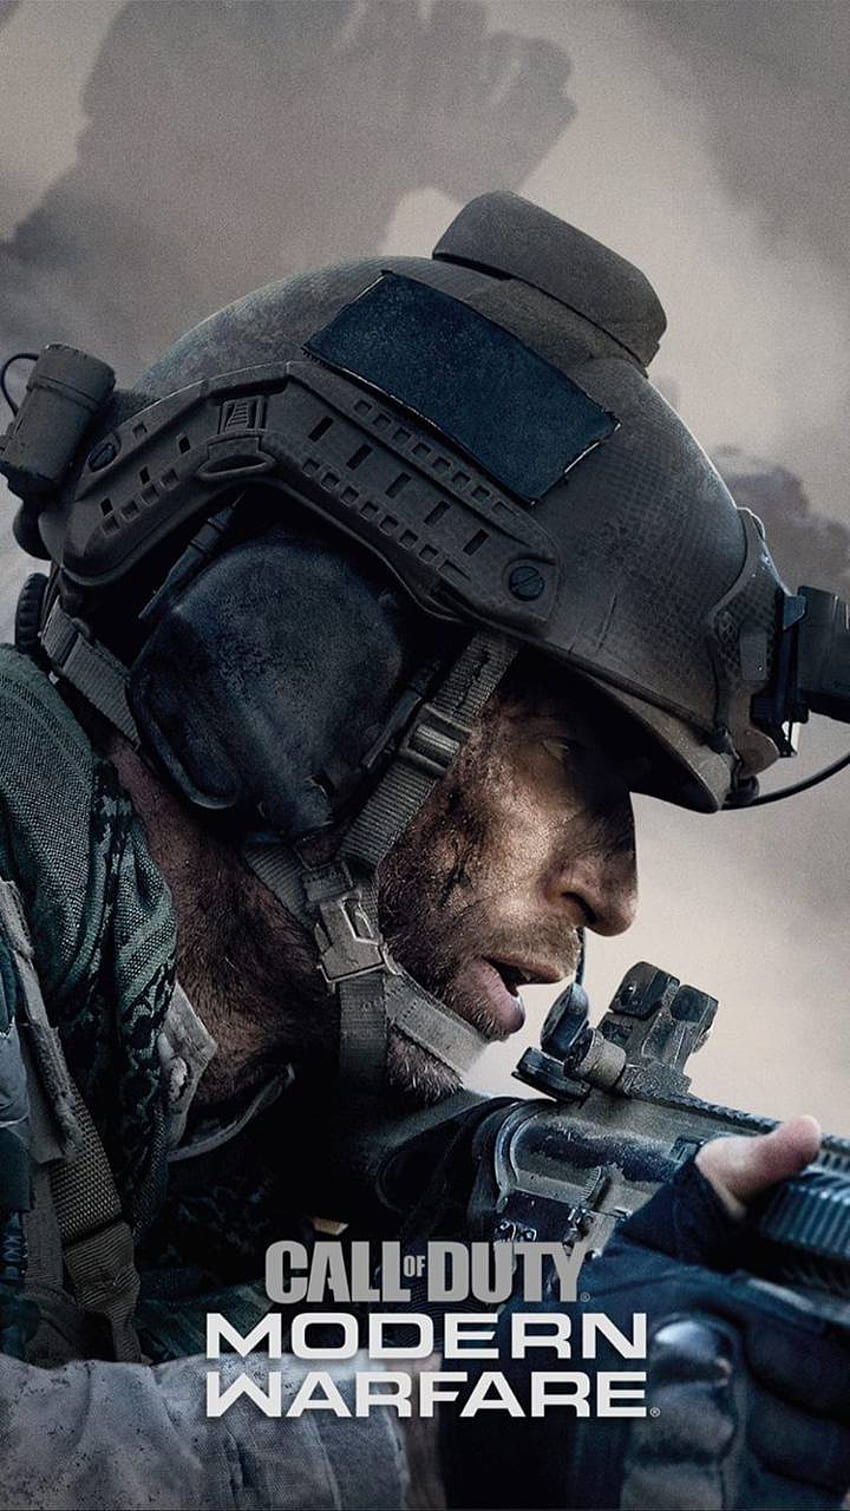 E3 2019: 'Call of Duty: Modern Warfare' mixes real grit, continuity